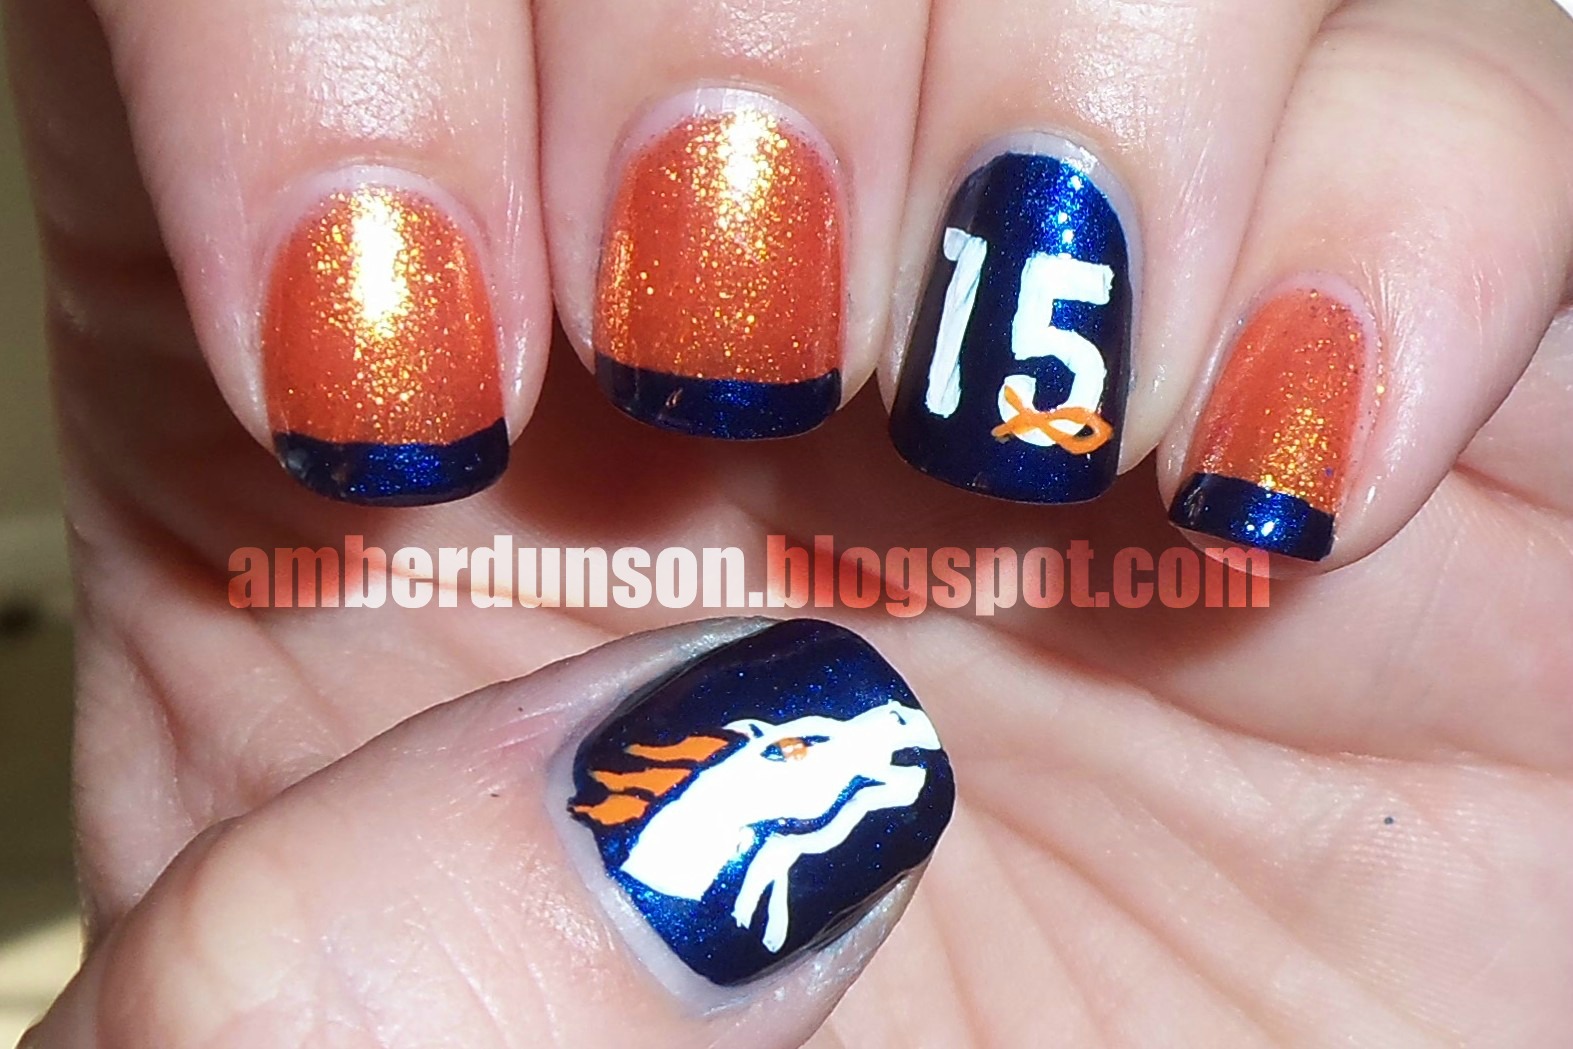 2. How to incorporate numbers into your nail art design - wide 5